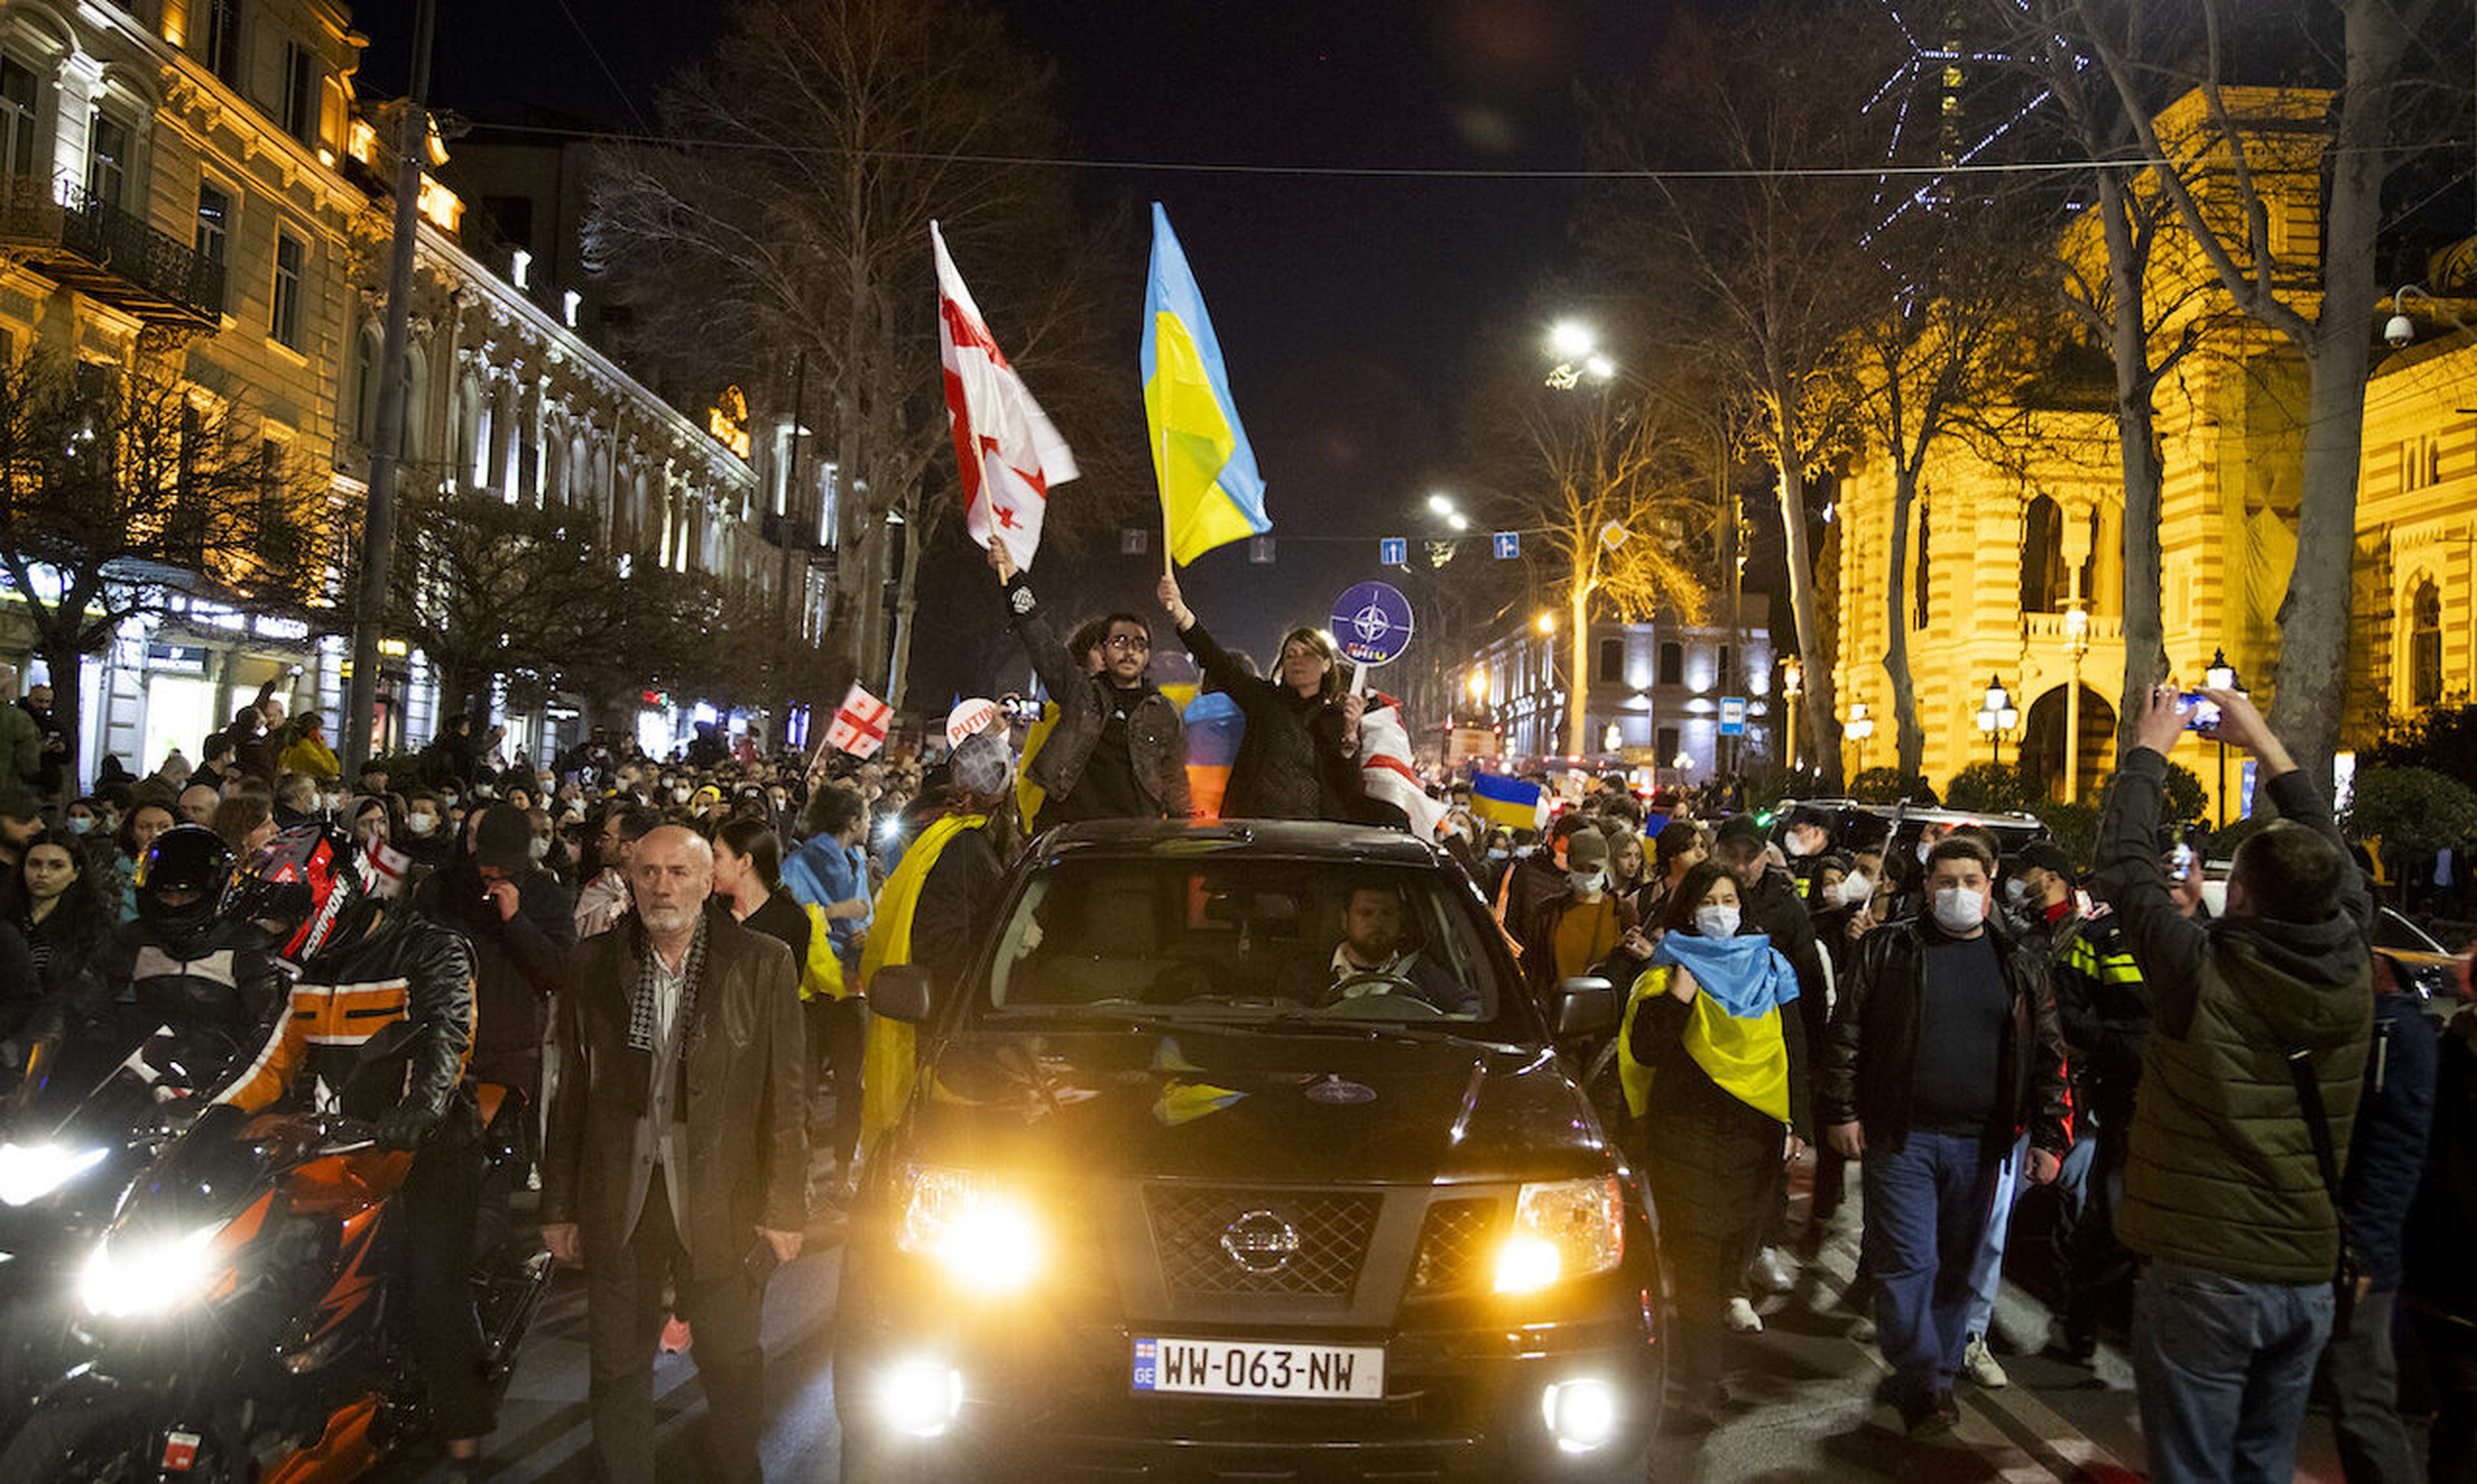 Demonstrators from cars wave flags as Georgians rally in support of Ukraine after Russia began its military invasion of the country on February 24. The other night, Russia began a large-scale attack on Ukraine, with explosions reported in multiple cities and far outside the restive eastern regions held by Russian-backed rebels. As tensions mount, t...